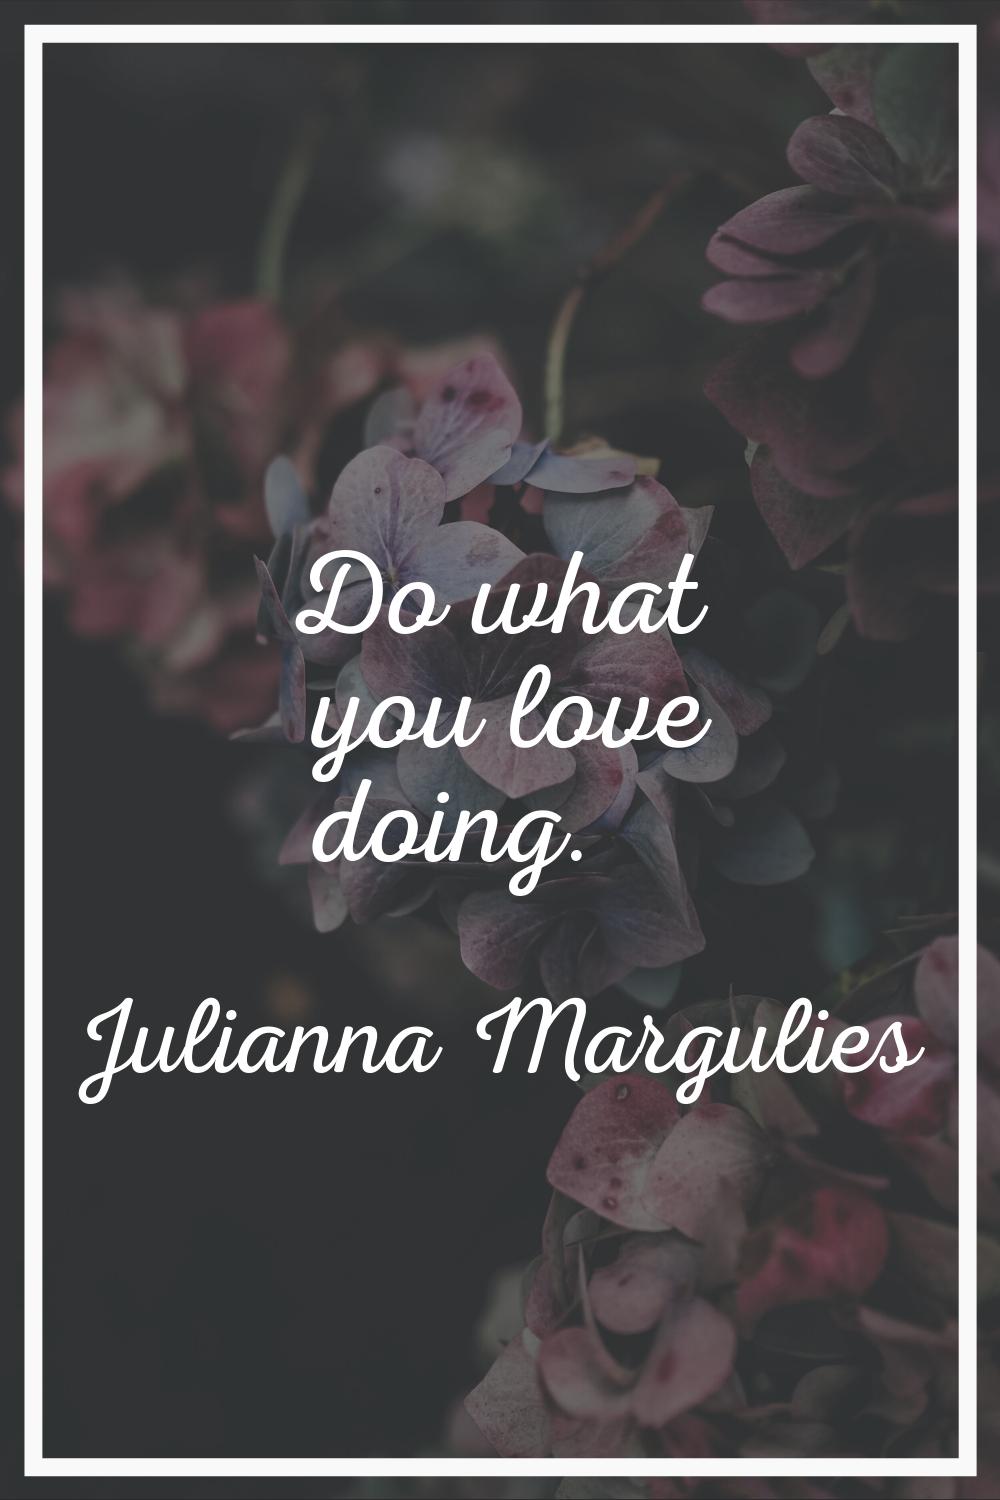 Do what you love doing.